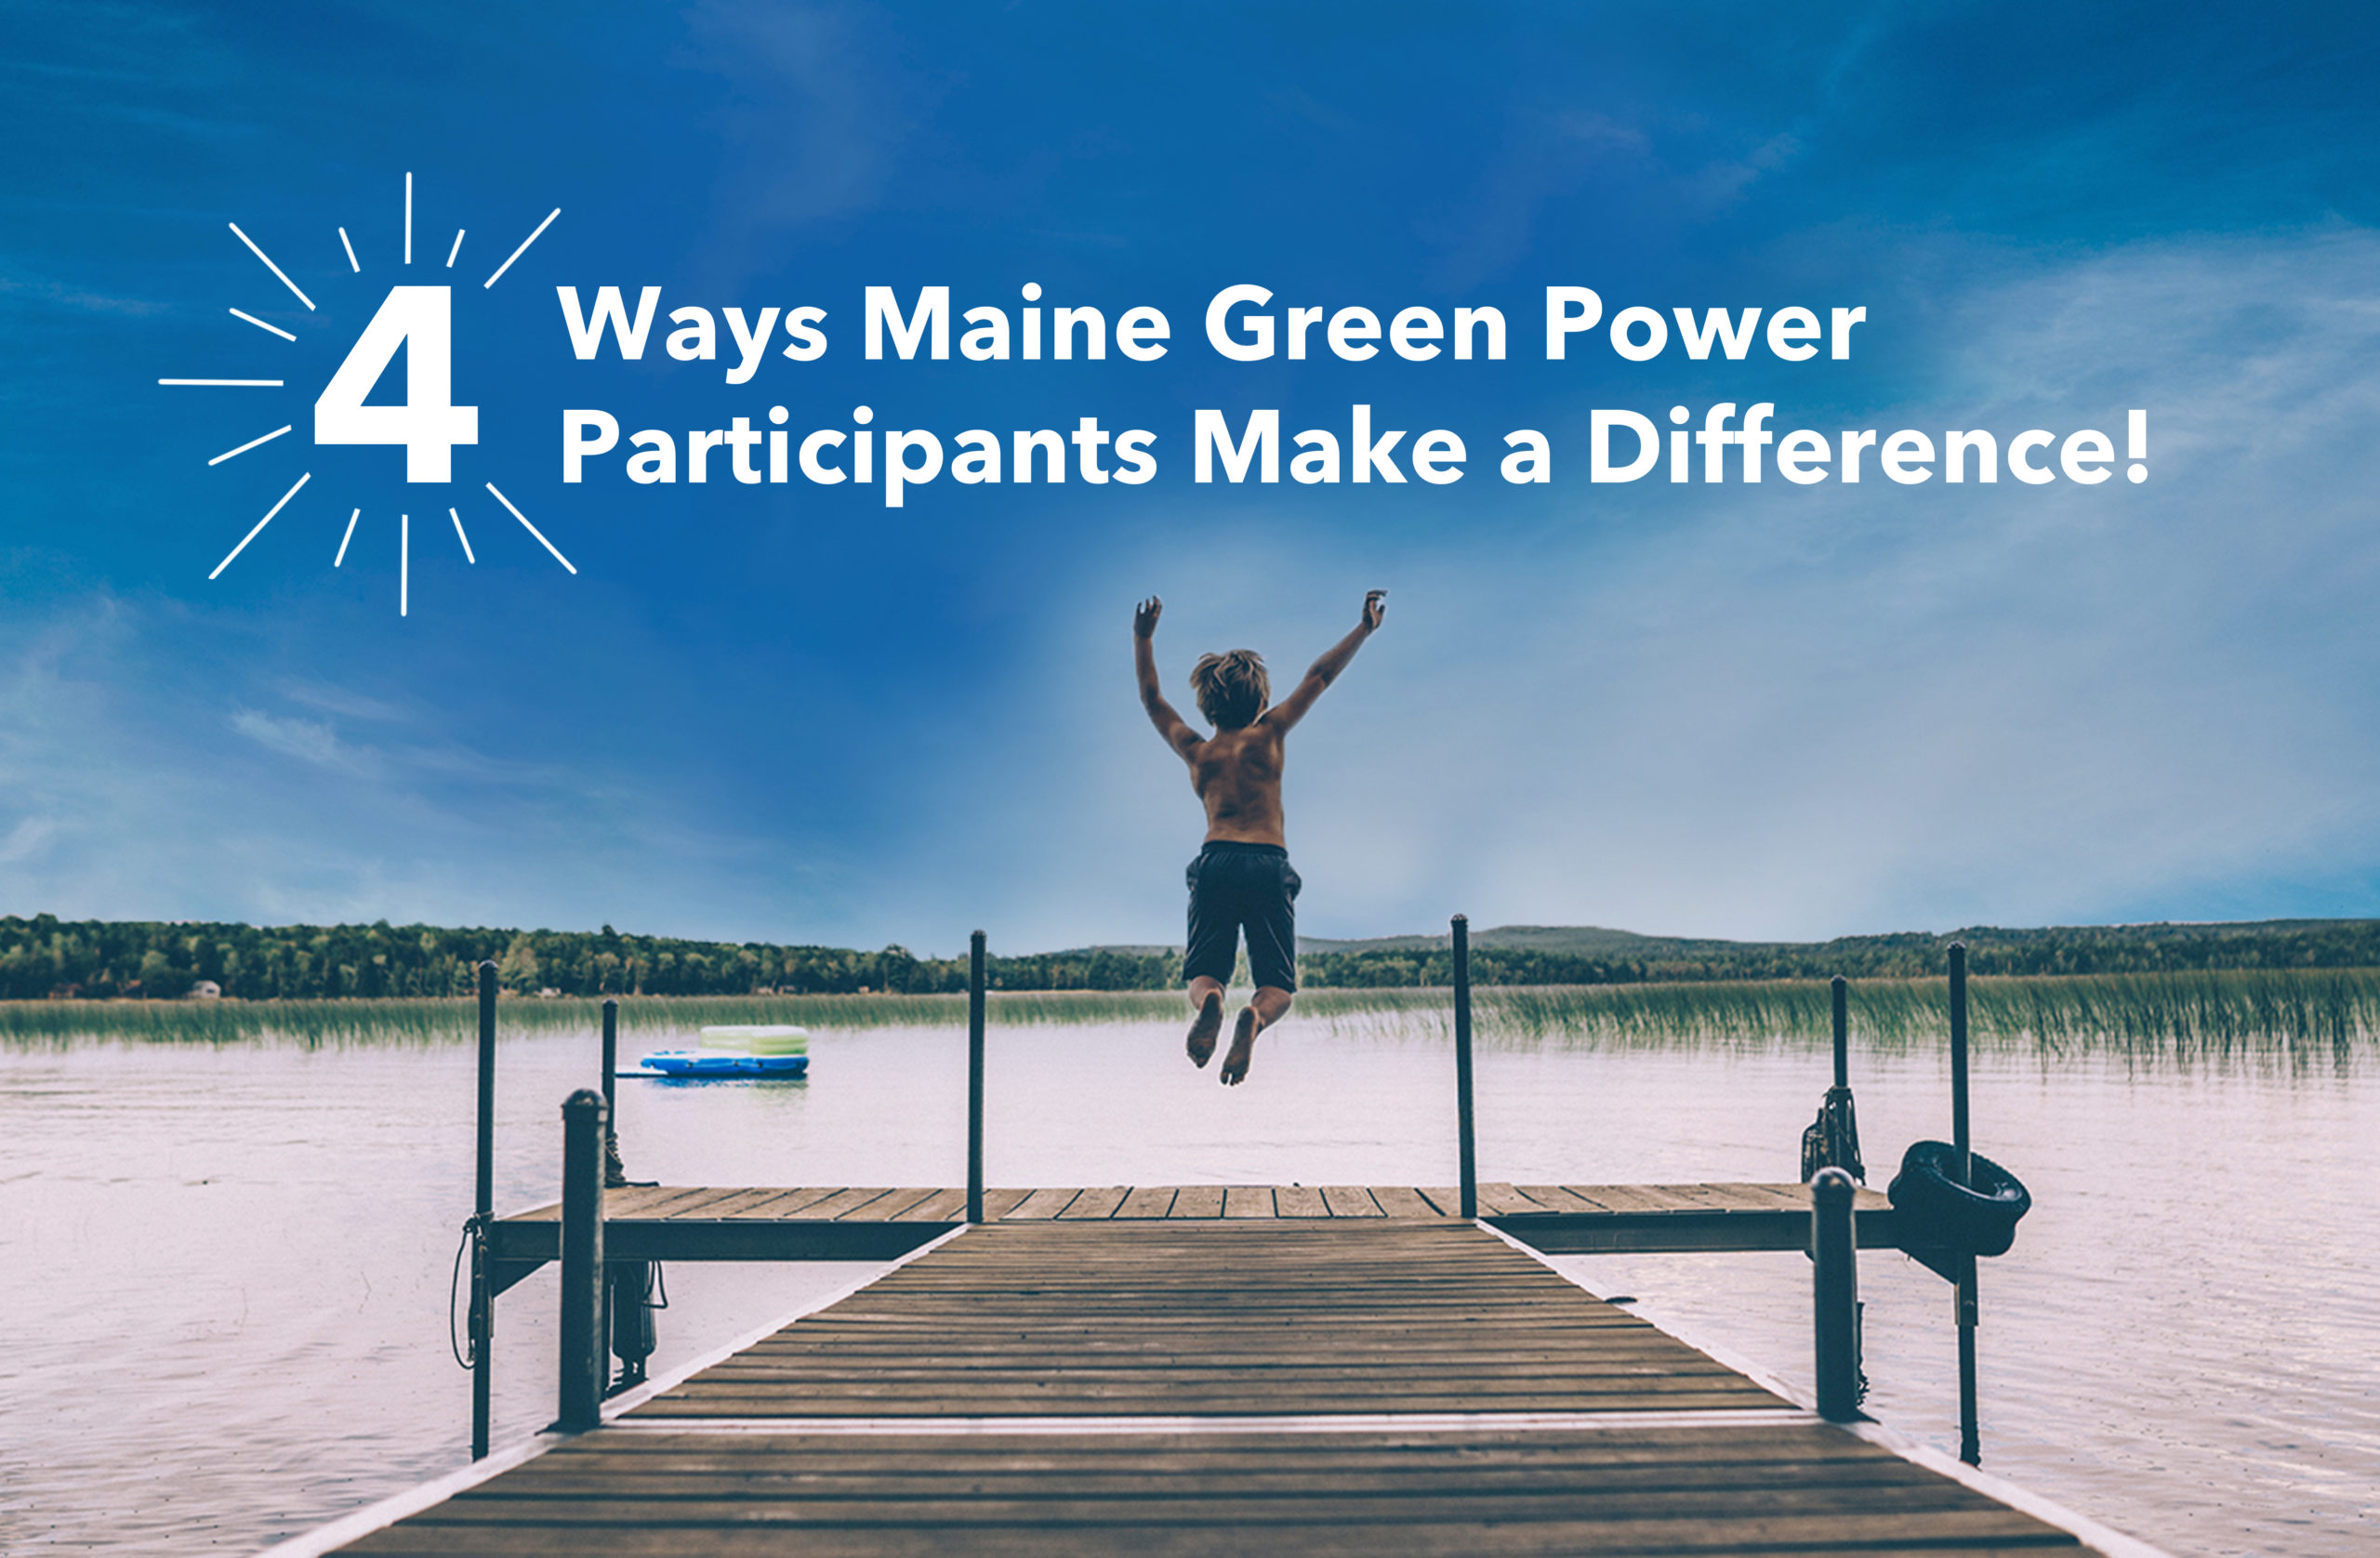 4 Ways Maine Green Power Participants Made a Difference!